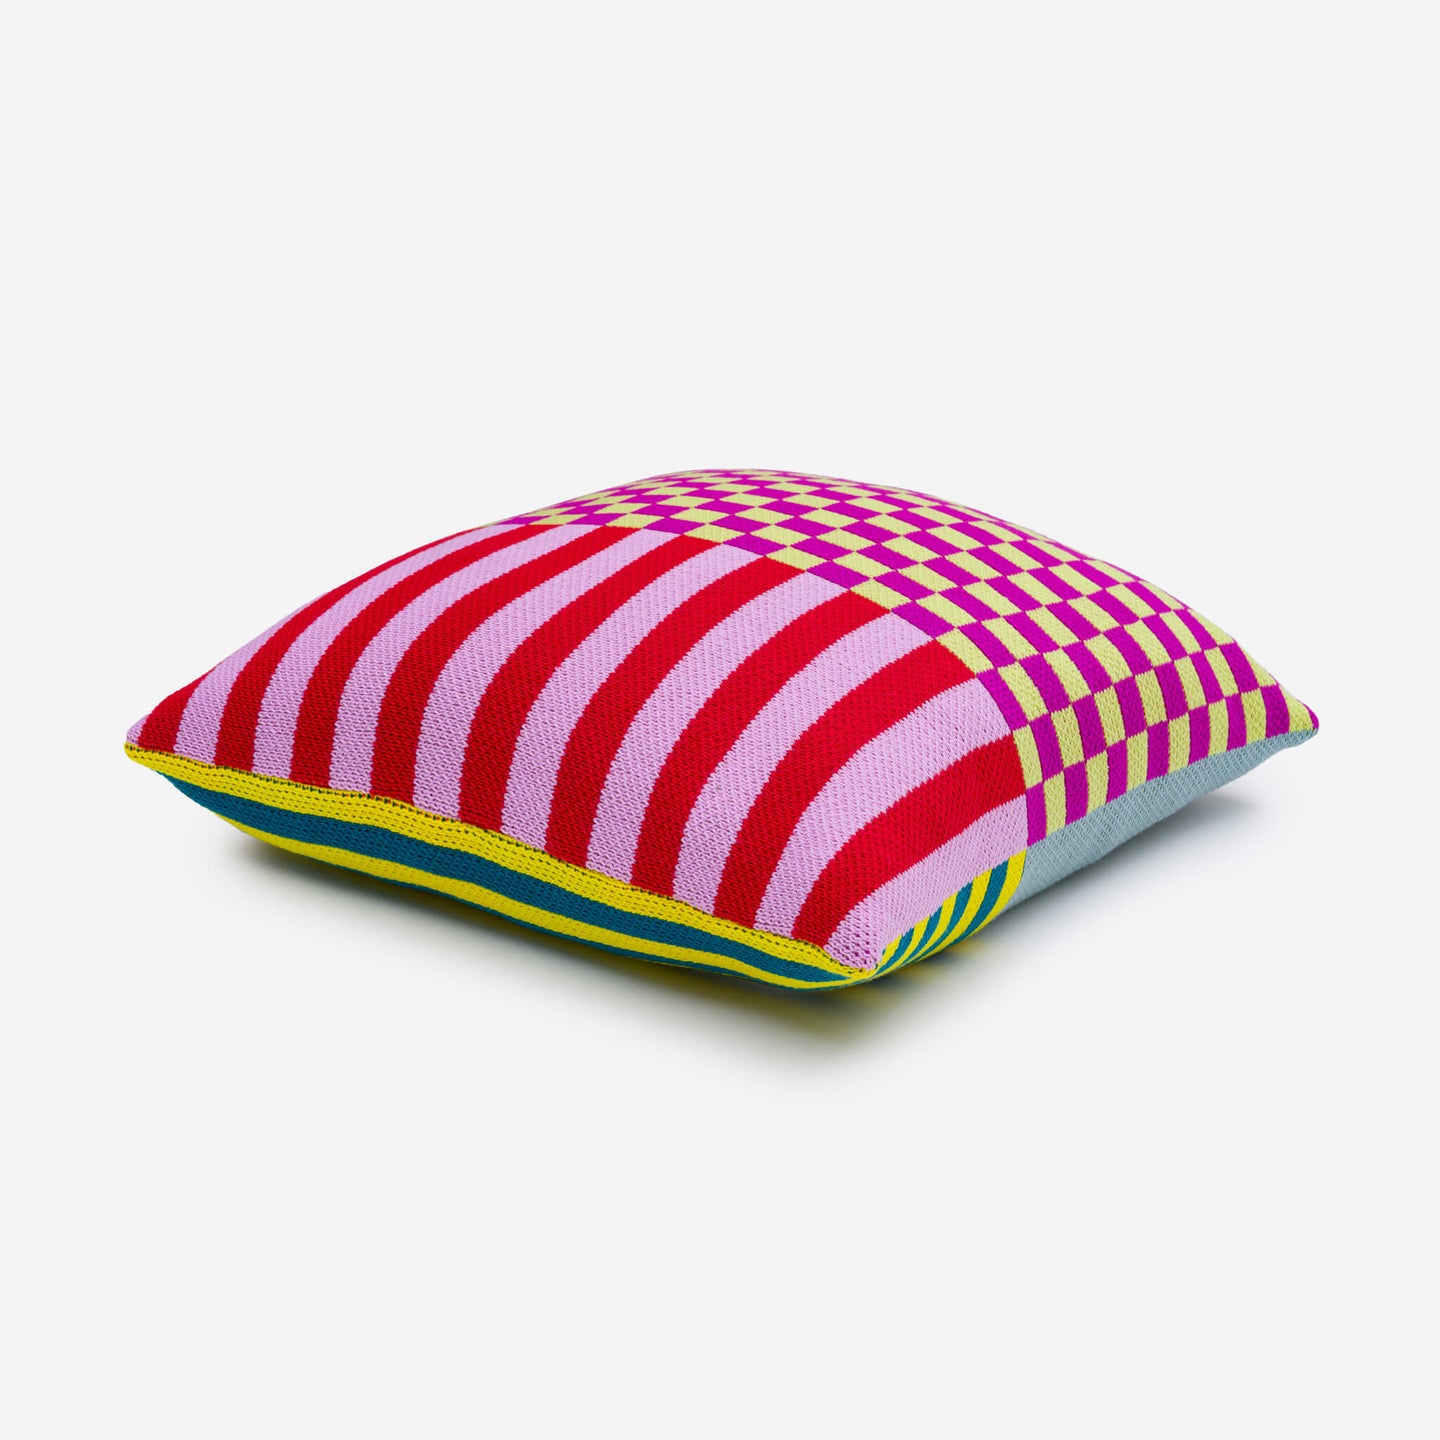 Pattern Patch Knit Pillow Cover Bold Pattern Colorful Mix Match Reversible